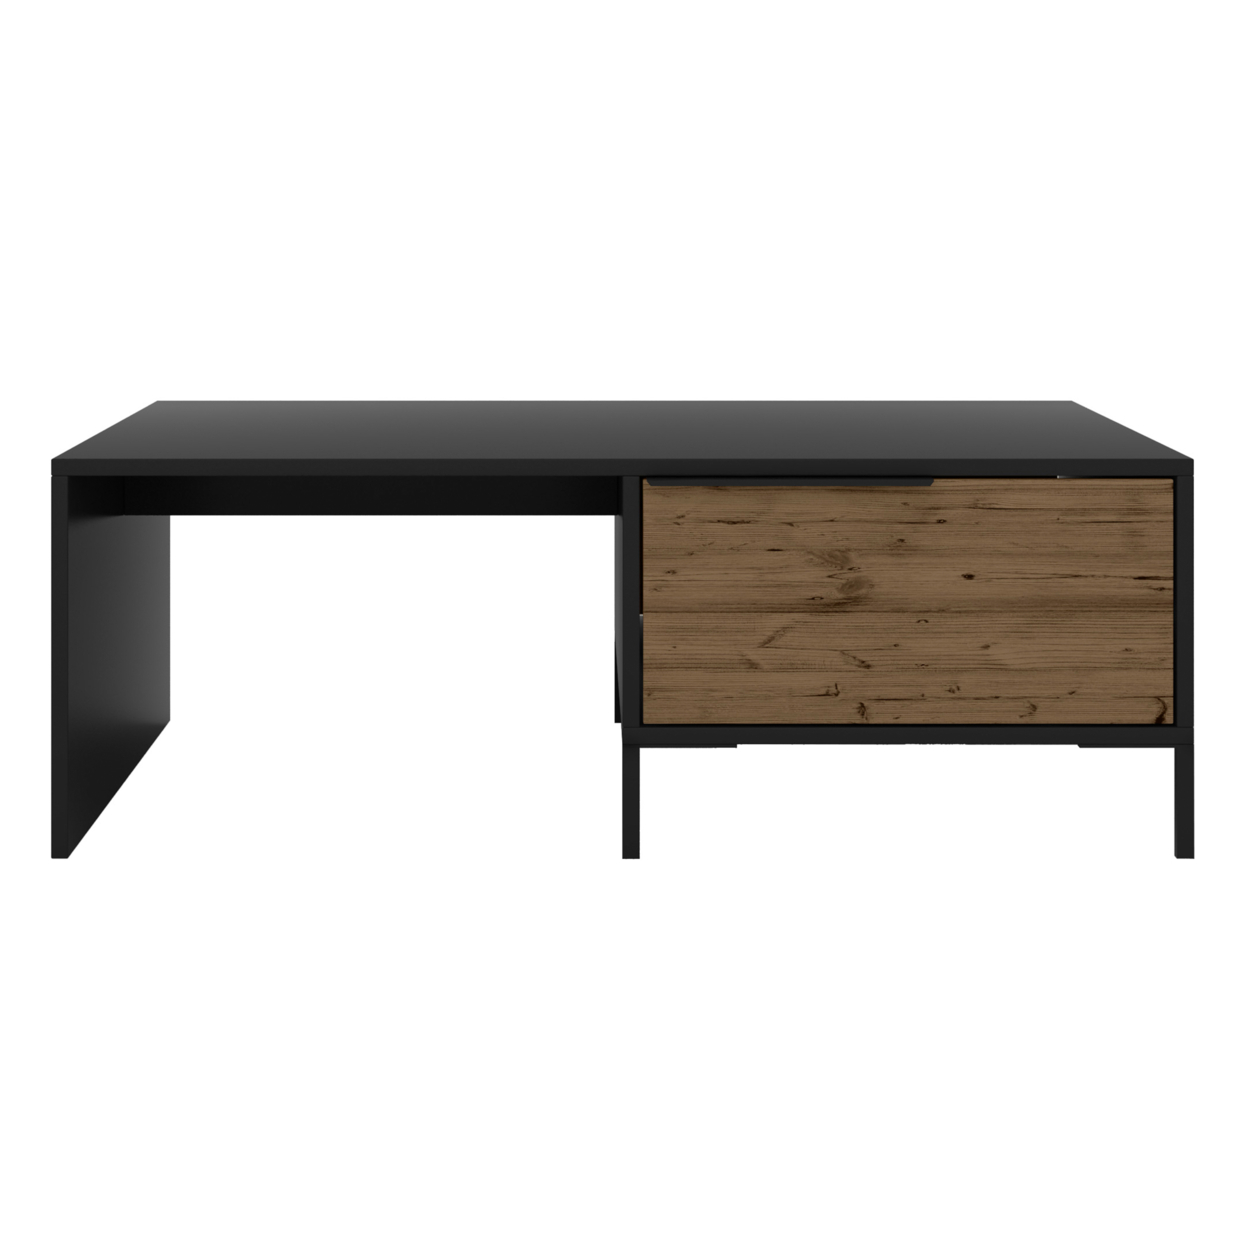 Wood And Metal Rectangular Accent Coffee Table With Drawer, Brown And Black- Saltoro Sherpi